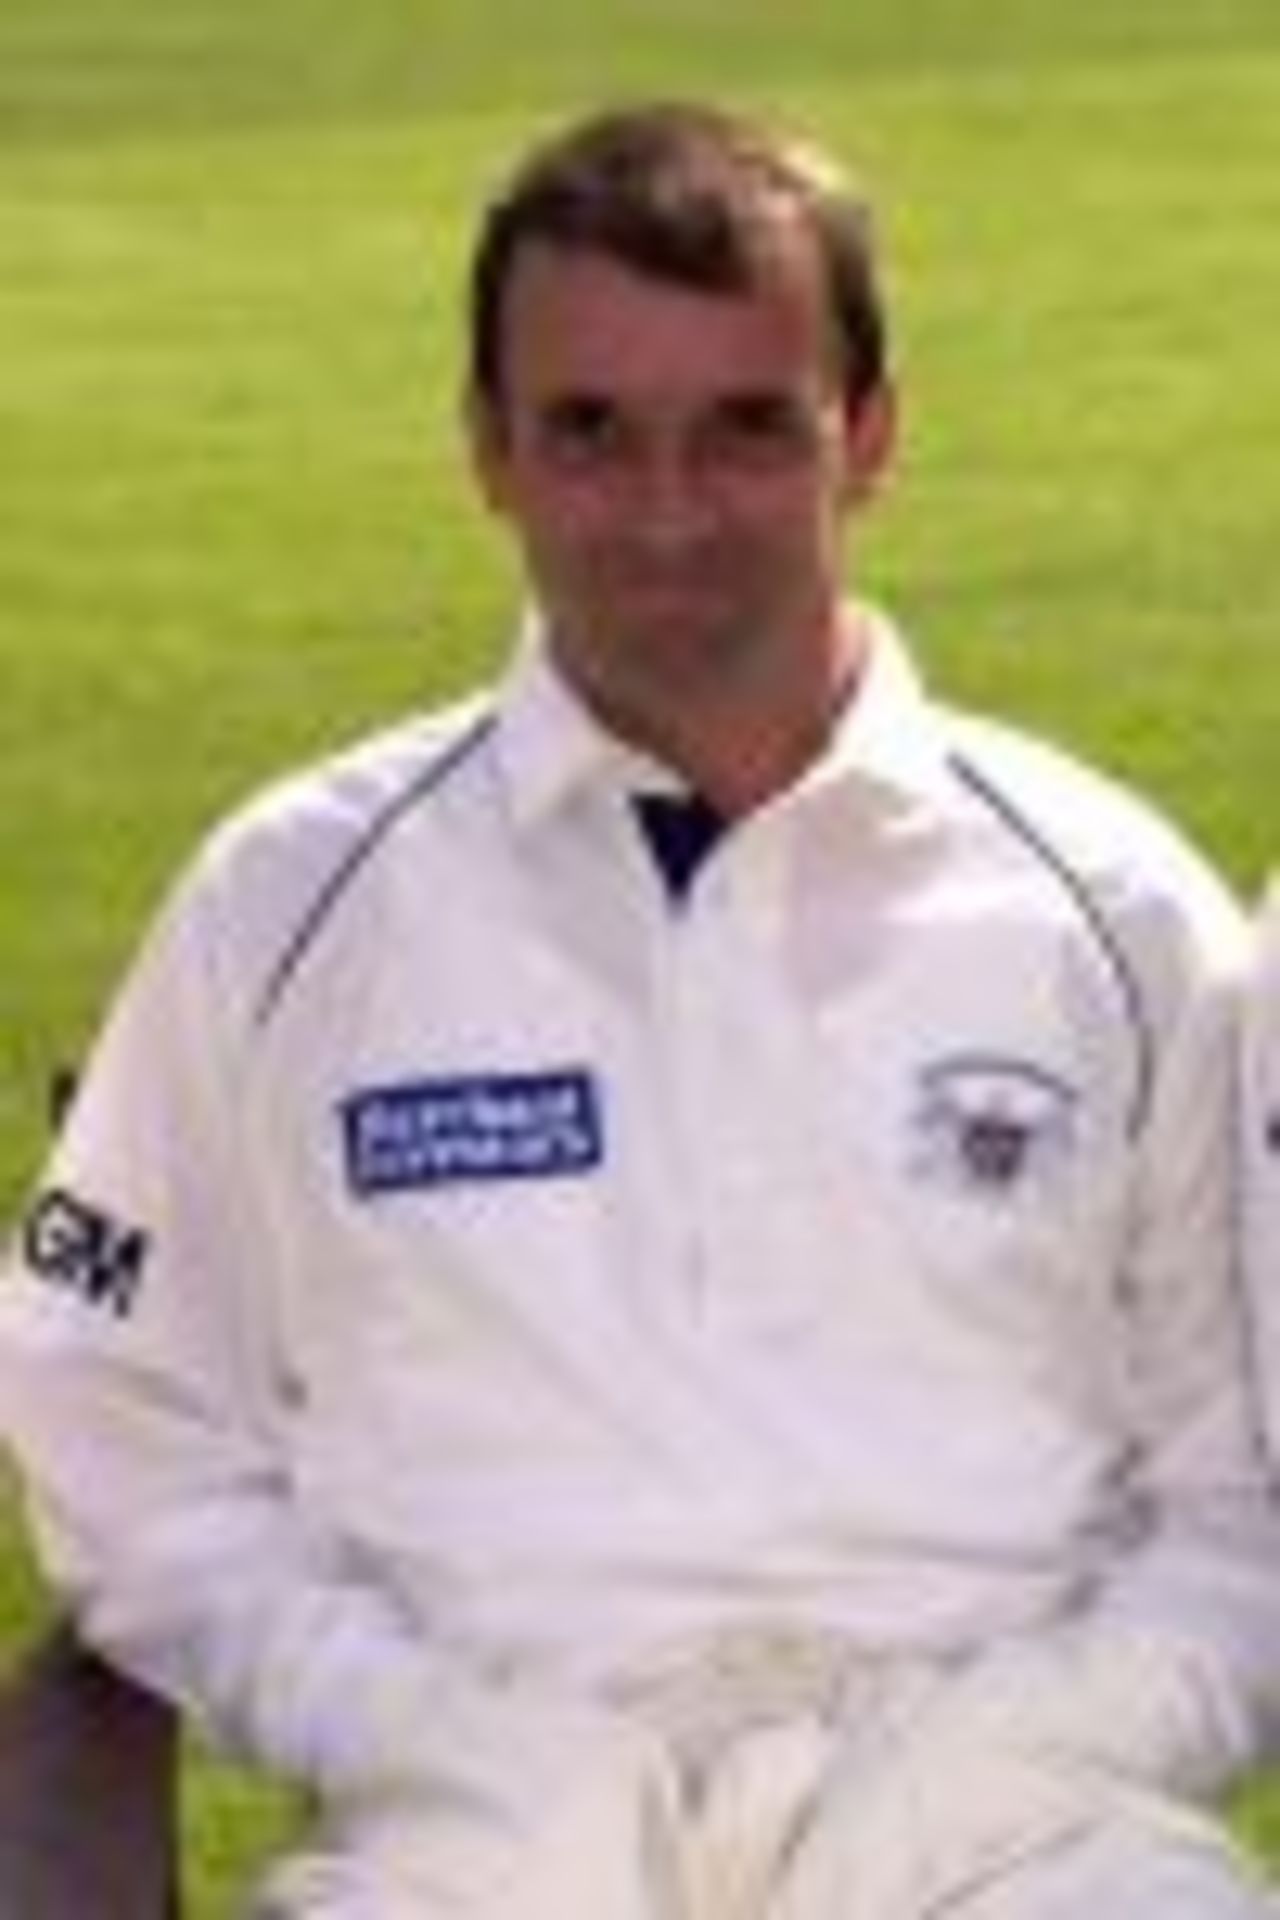 Taken at the Gloucestershire CCC Photocall April 2001